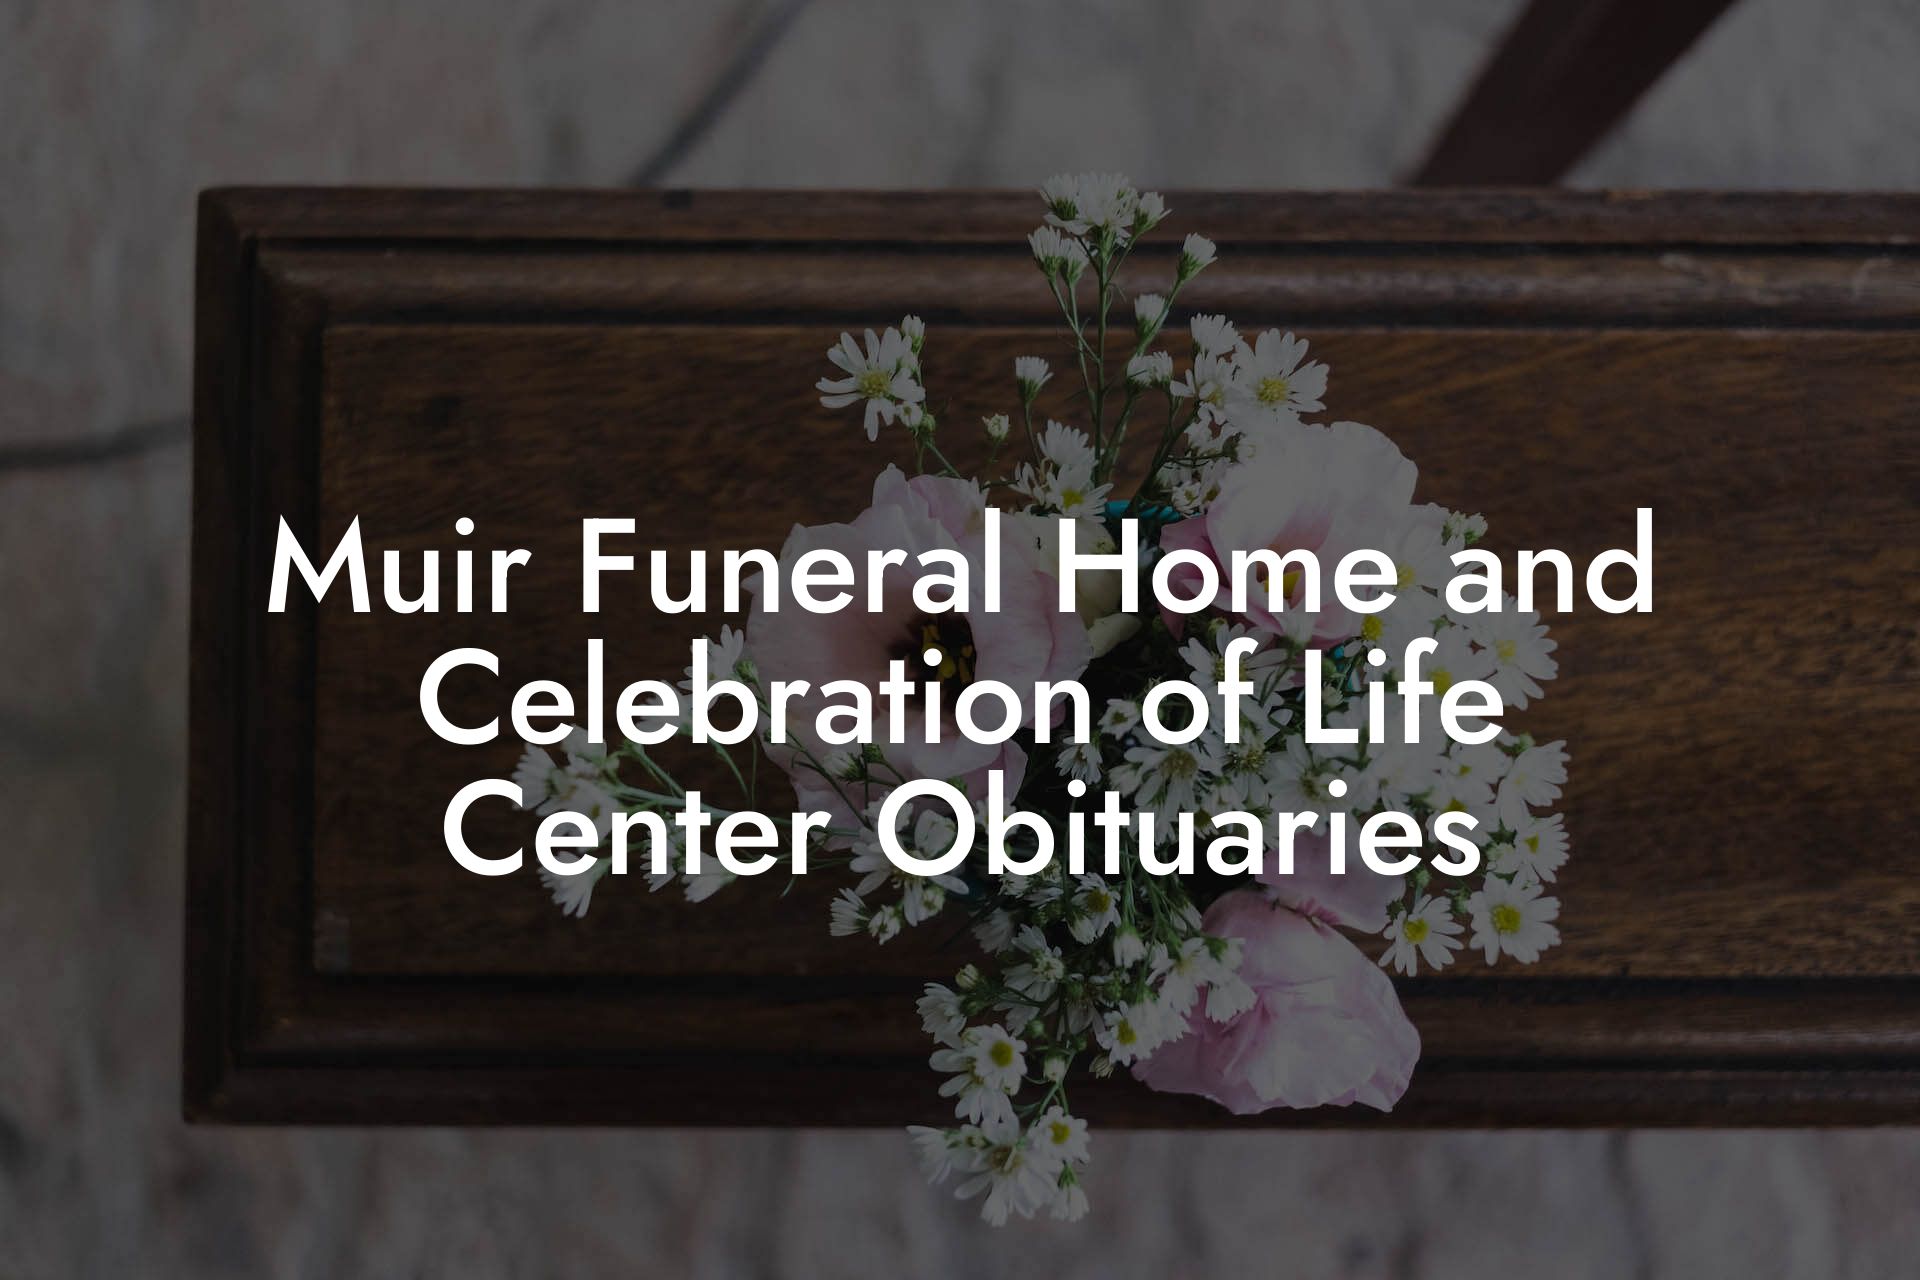 Muir Funeral Home and Celebration of Life Center Obituaries